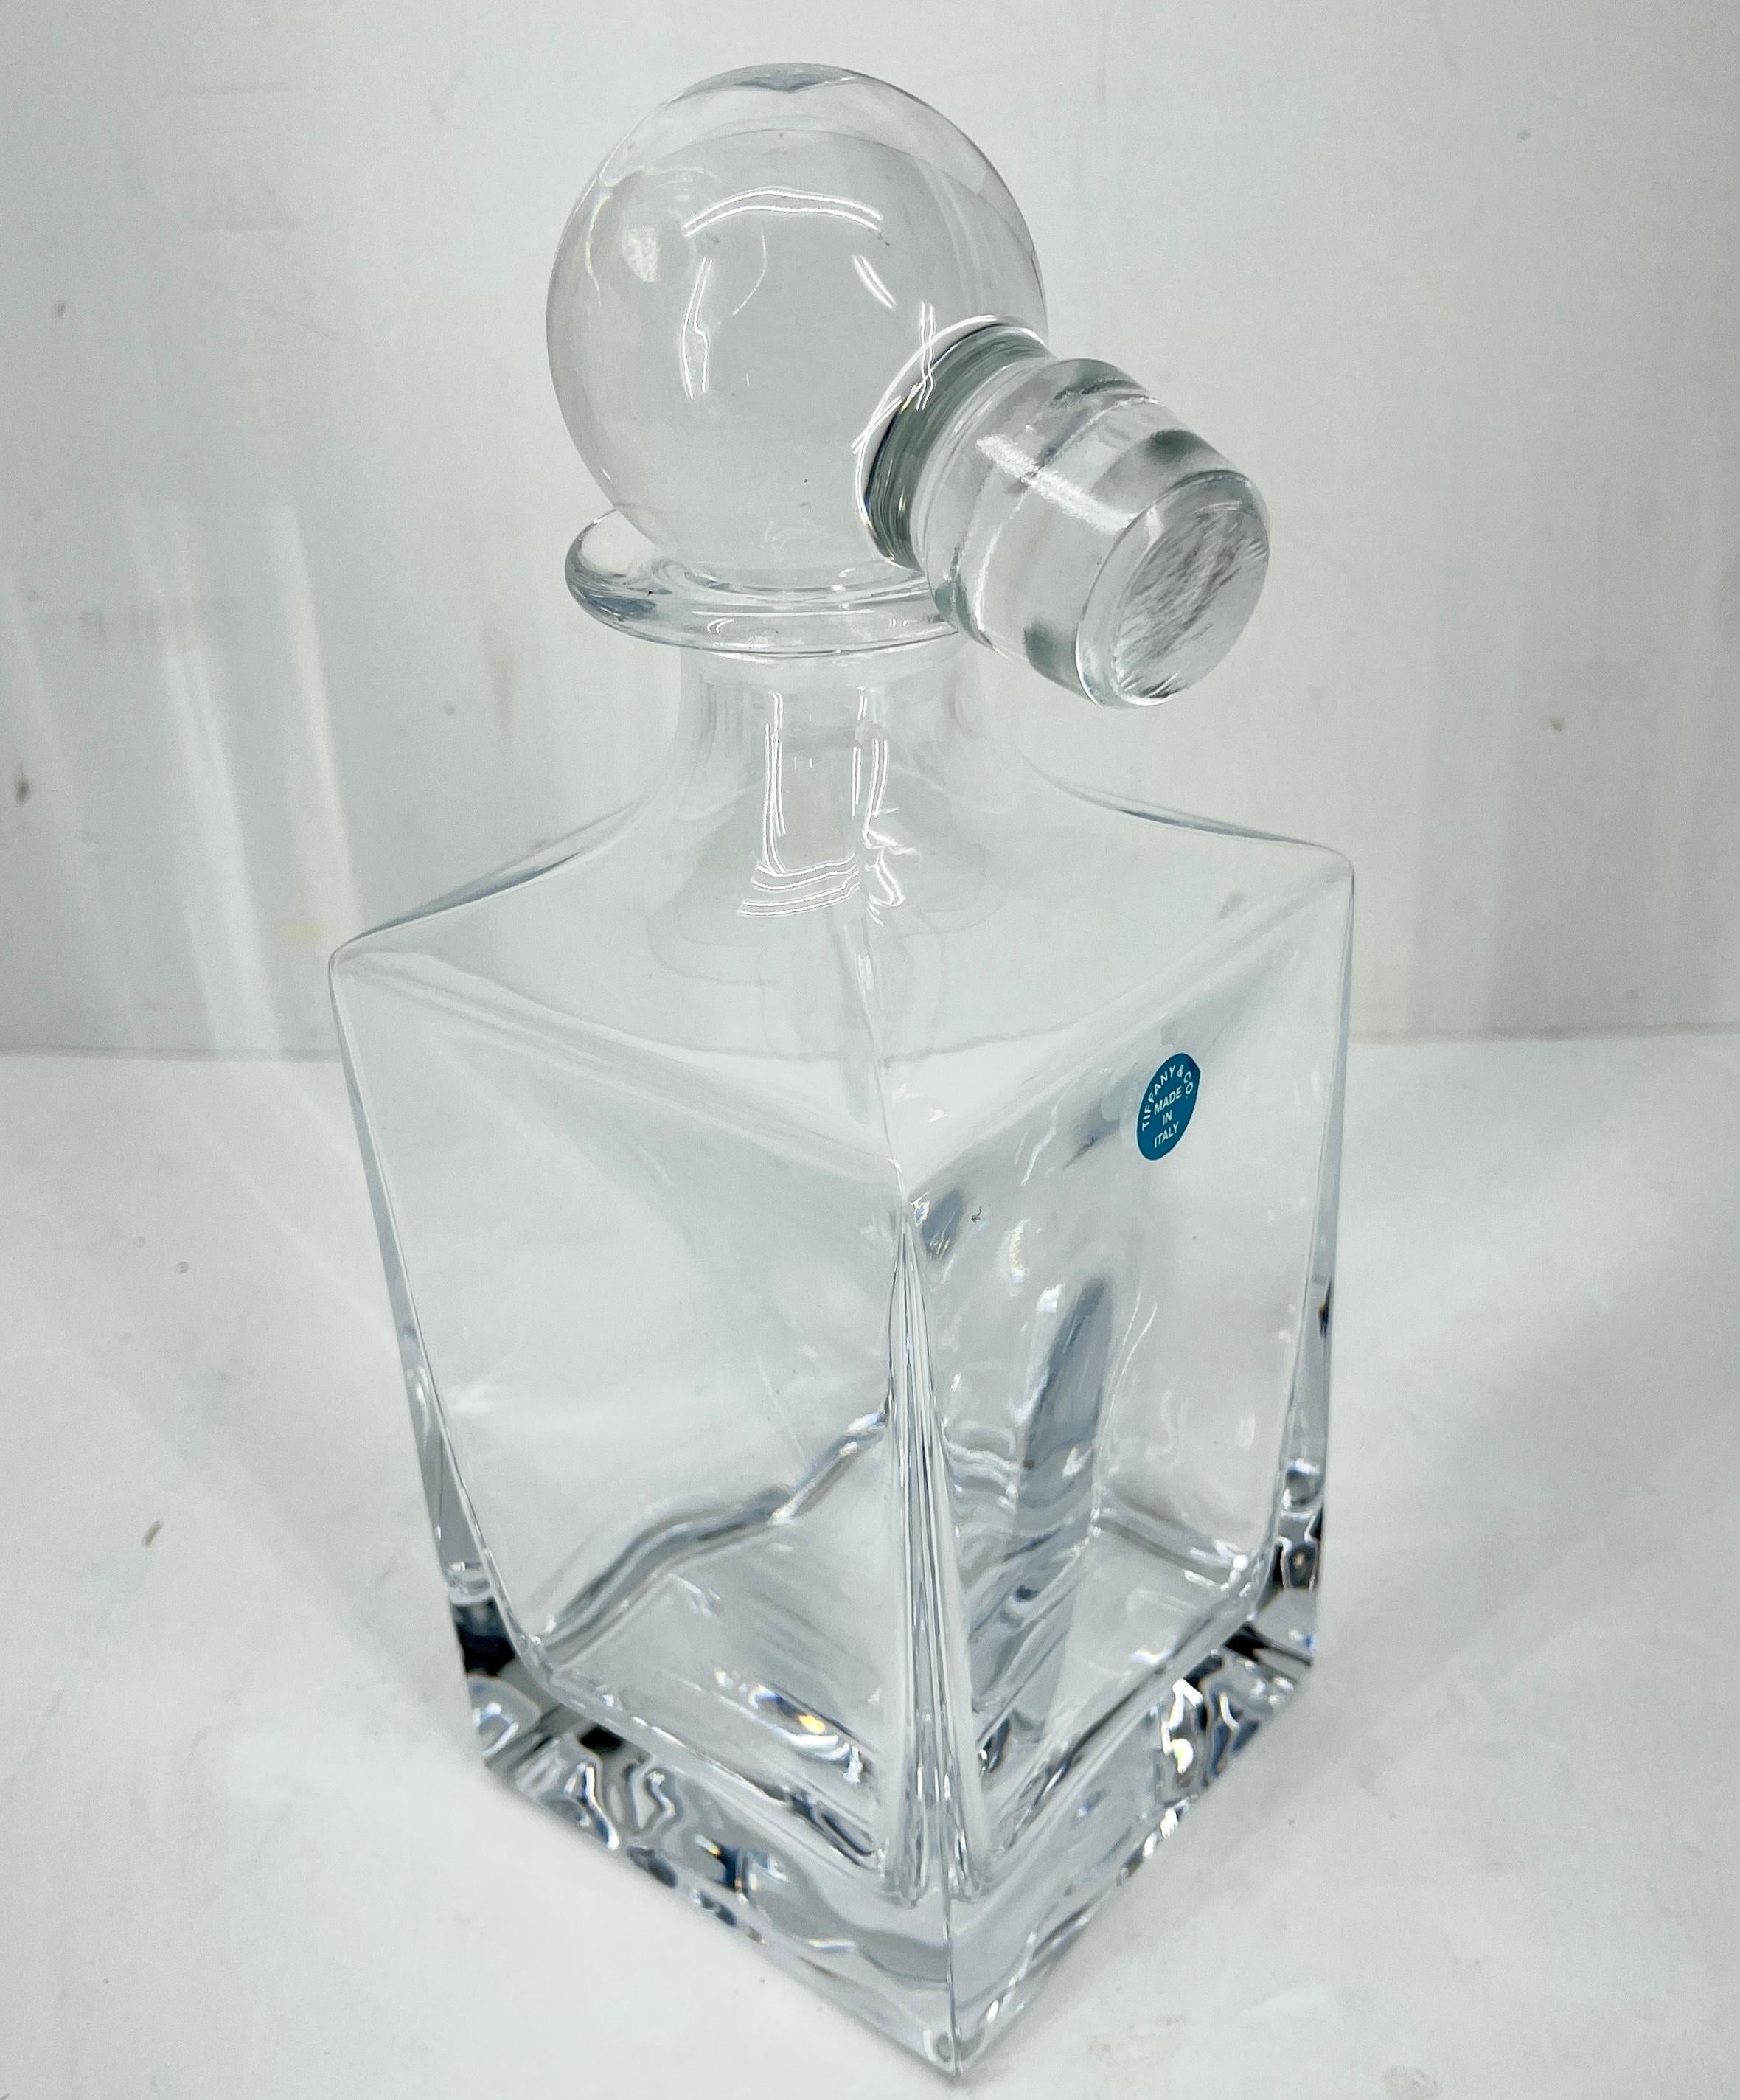 Hand-Crafted Vintage Tiffany & Co. Glass Decanter, Made in Italy 